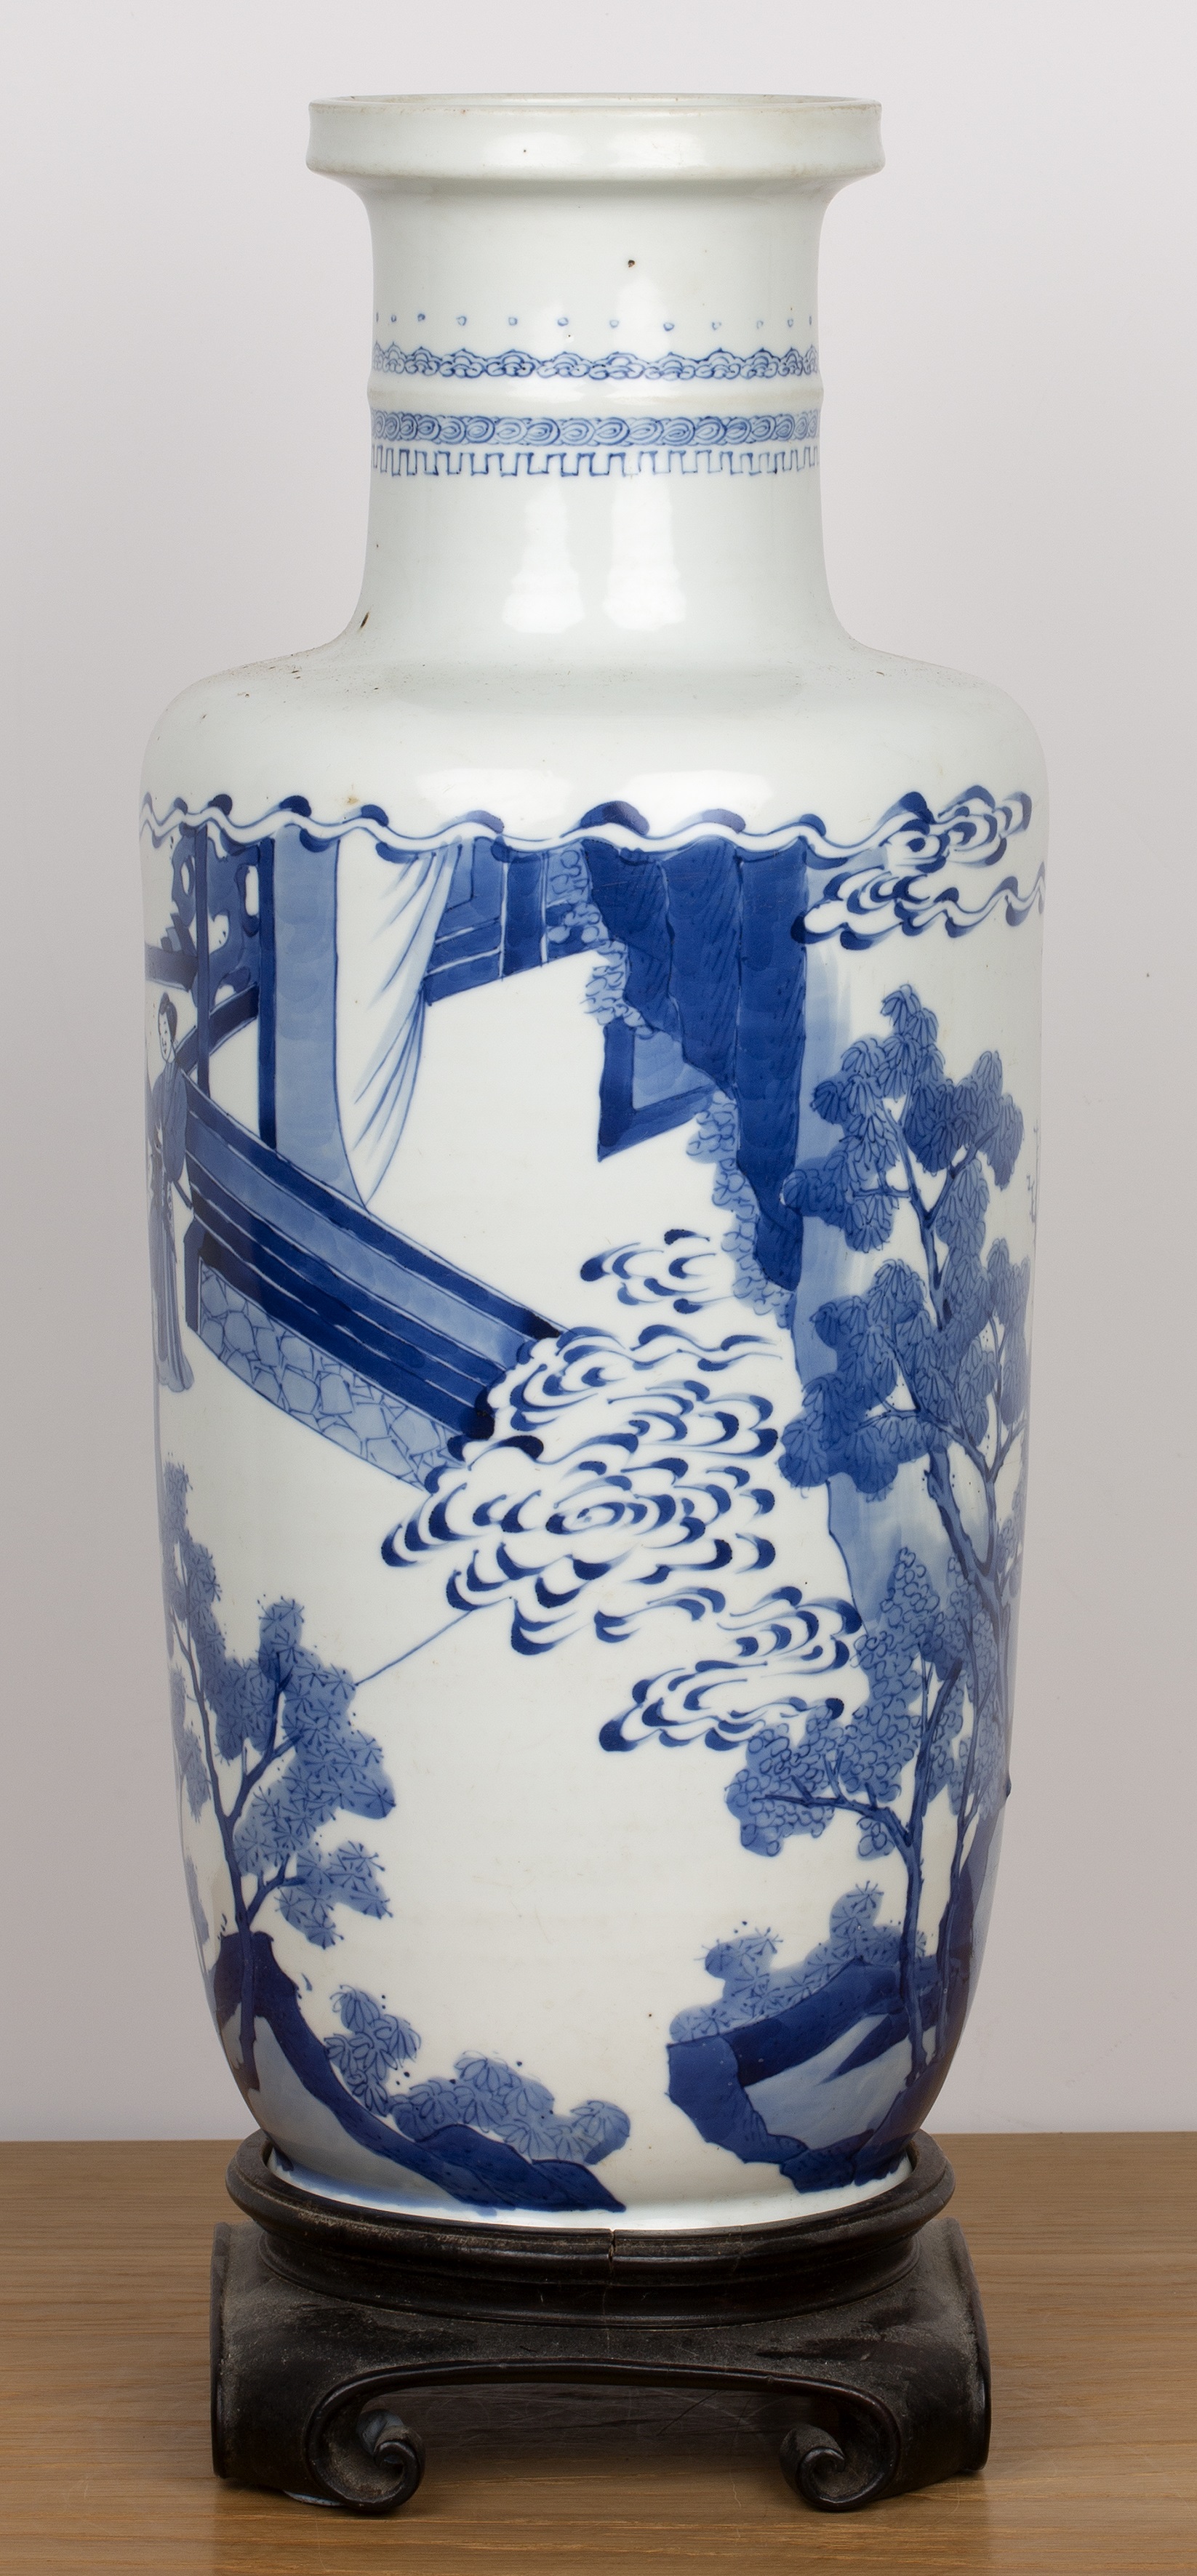 Blue and white porcelain rouleau vase Chinese, Kangxi painted with scholars, clouds, and figures - Image 2 of 33